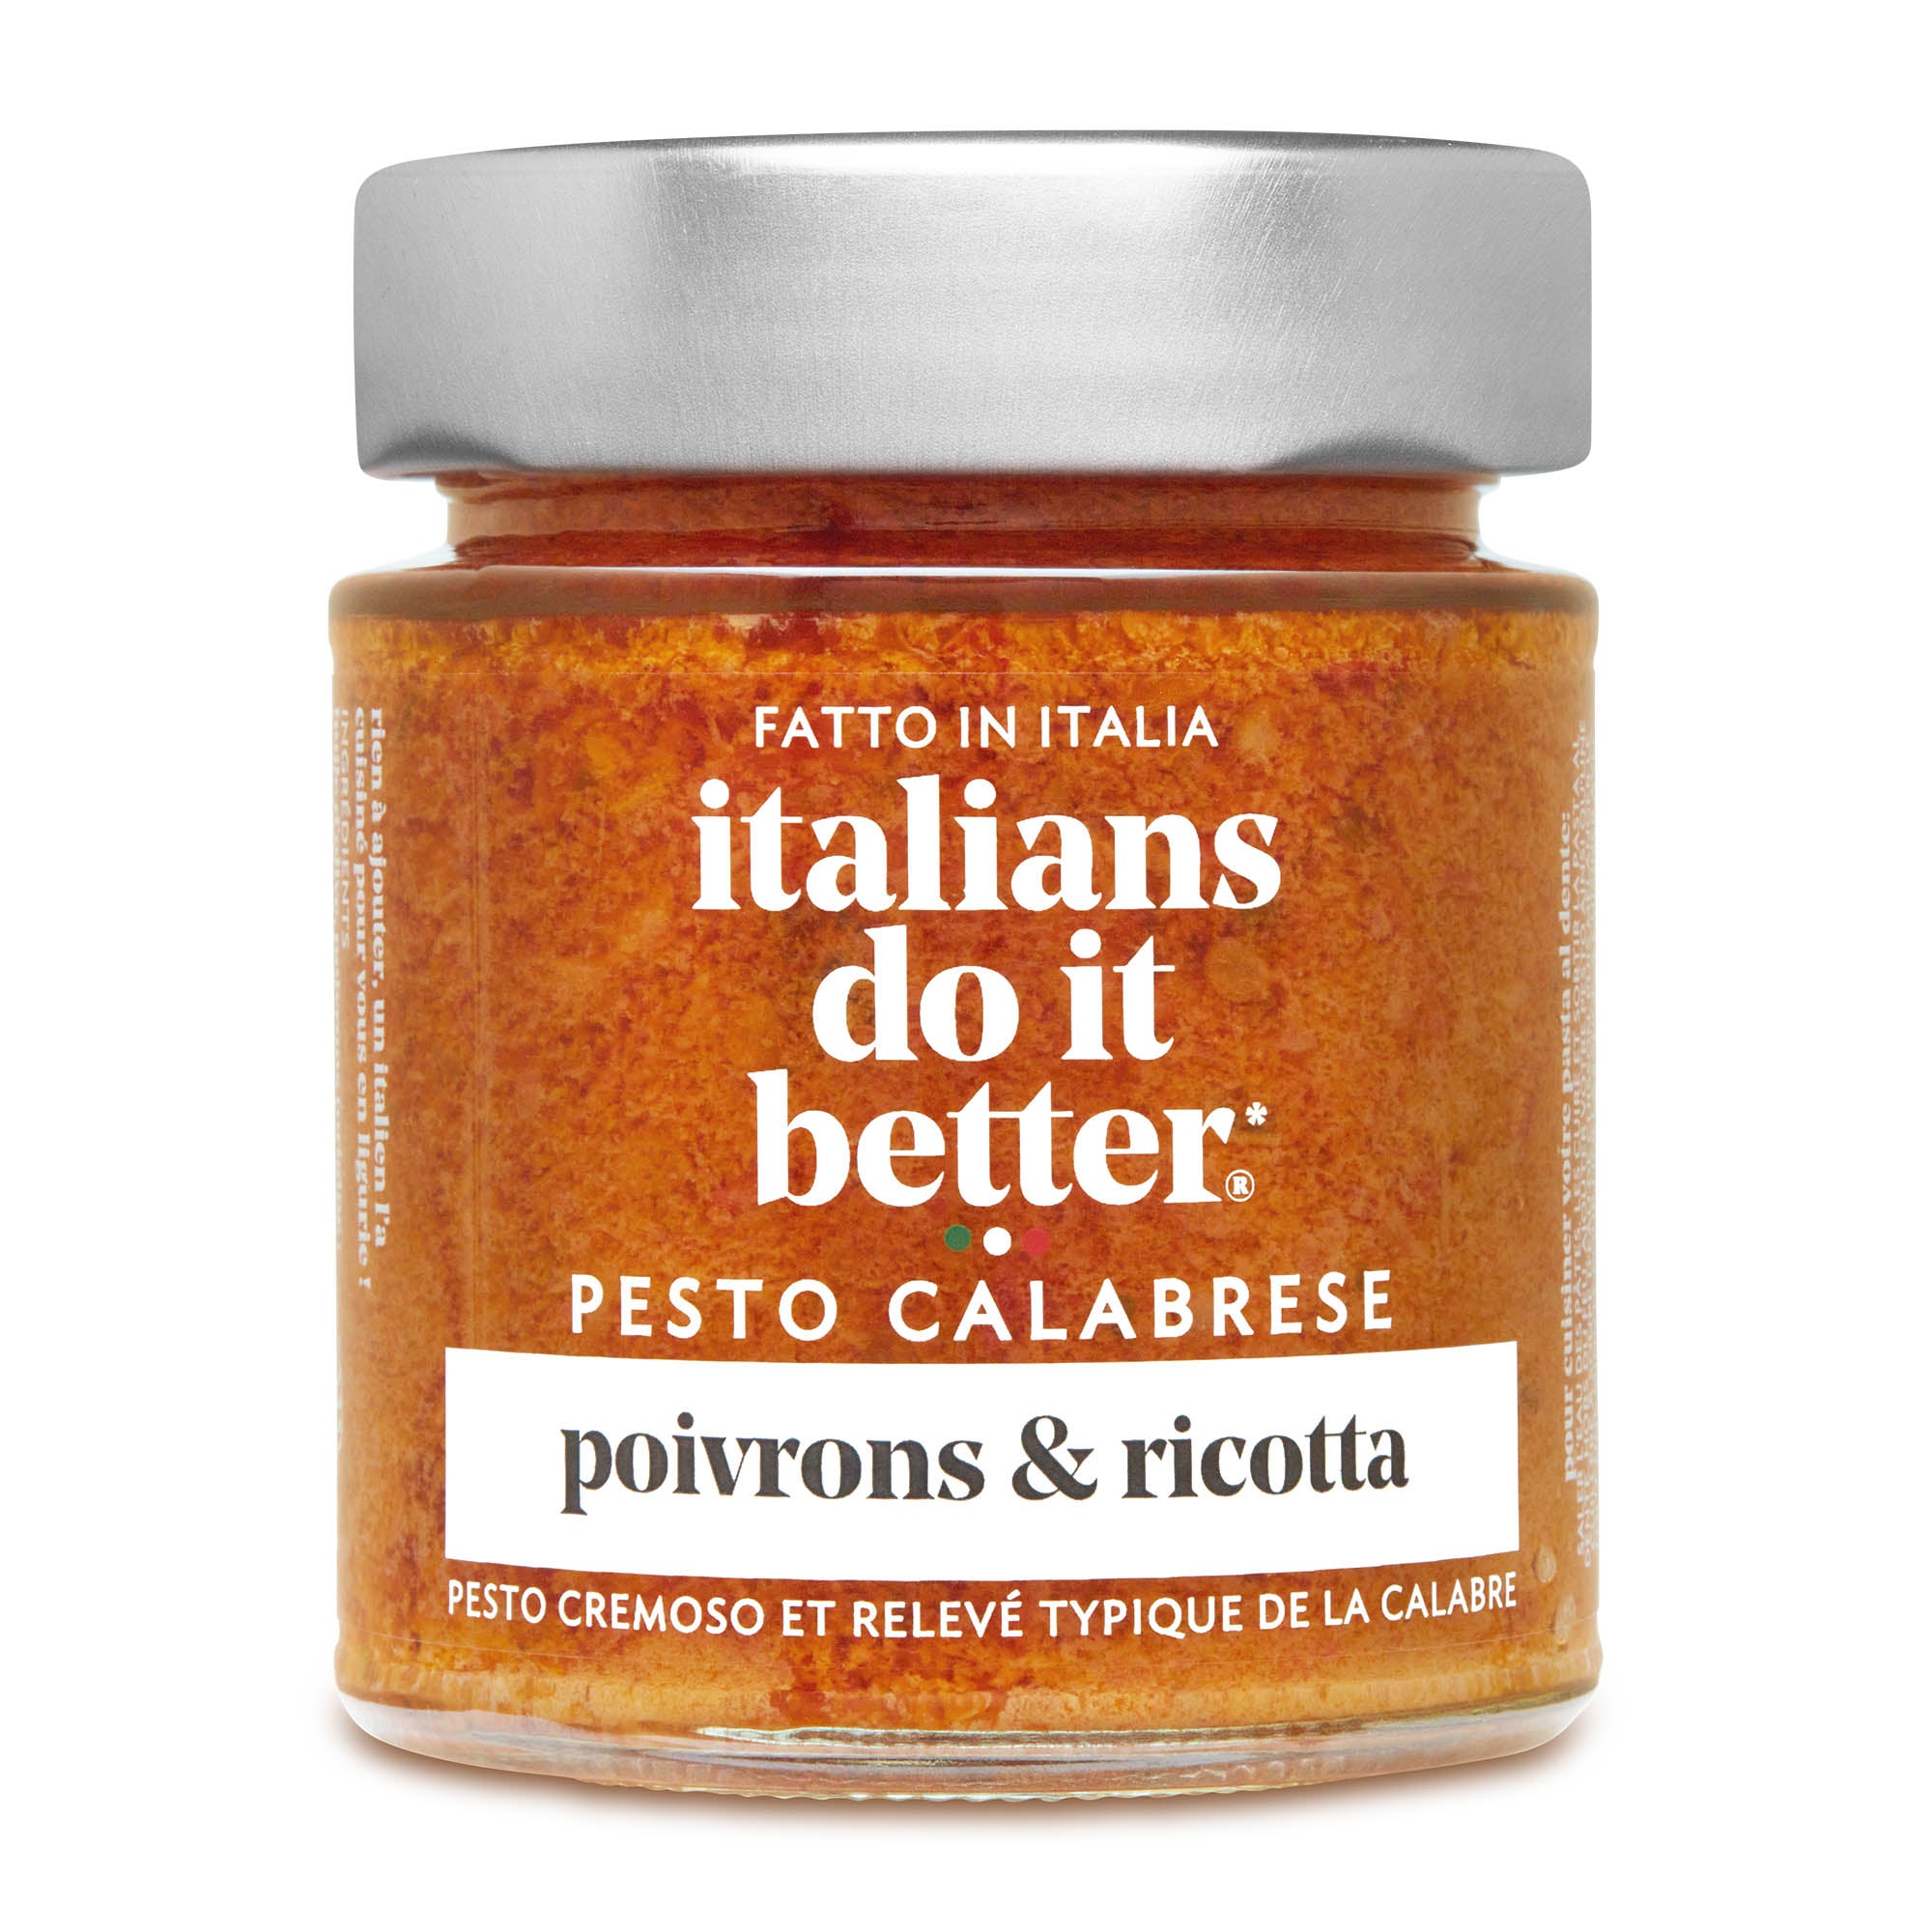 Pesto Calabrese - Peppers and ricotta - 135g